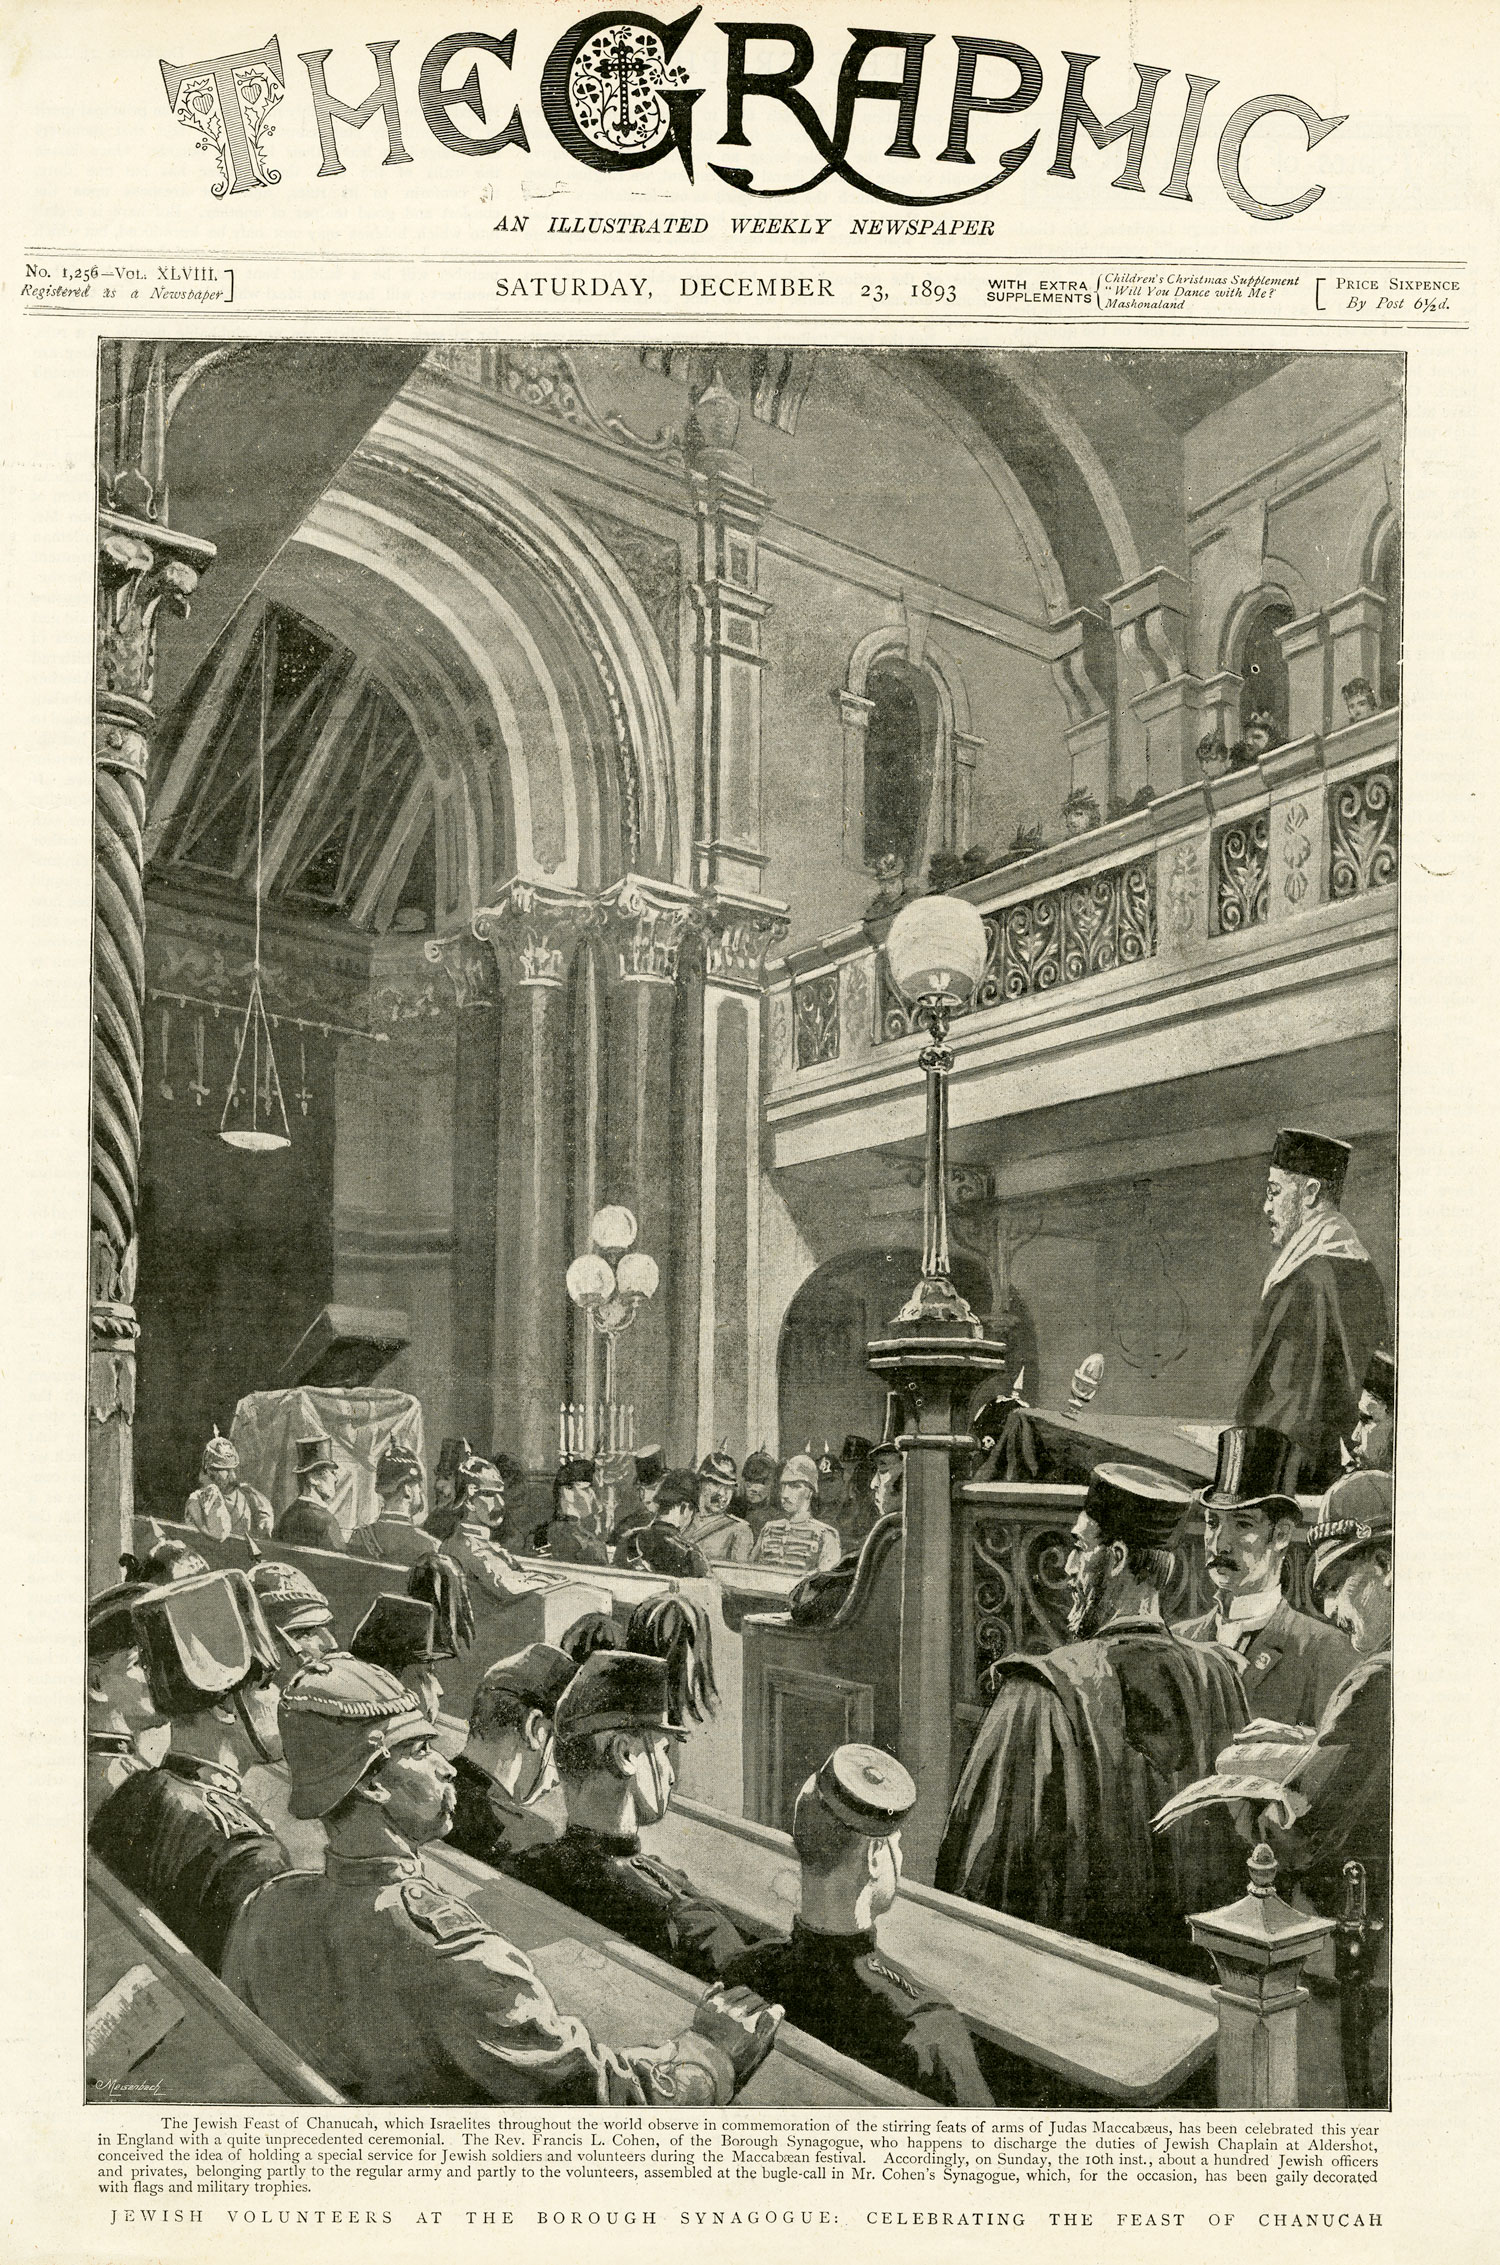 lithograph, Hanakkah celebration in a synagogue, cover of The Graphic magazine